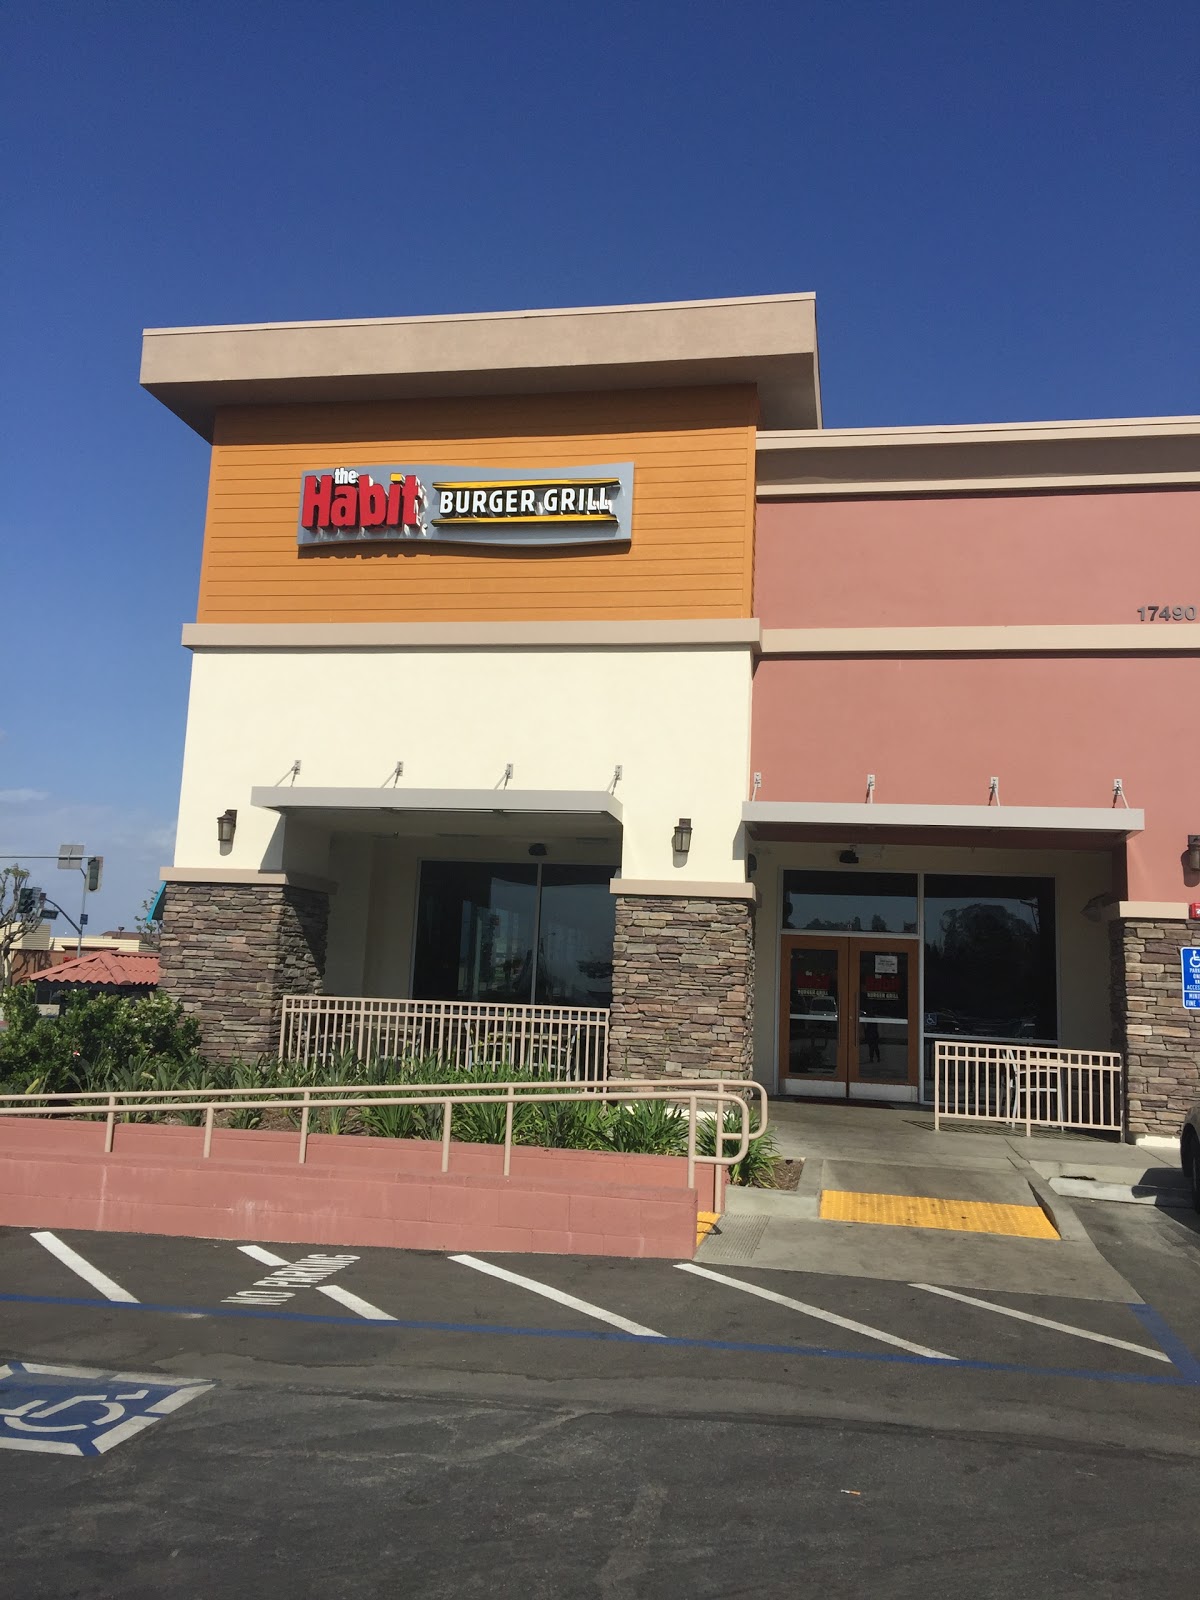 Photo of Curative Puente Hills Town Center (Next to The Habit Burger Grill) COVID Testing at 17490 Colima Rd, Rowland Heights, CA 91748, USA